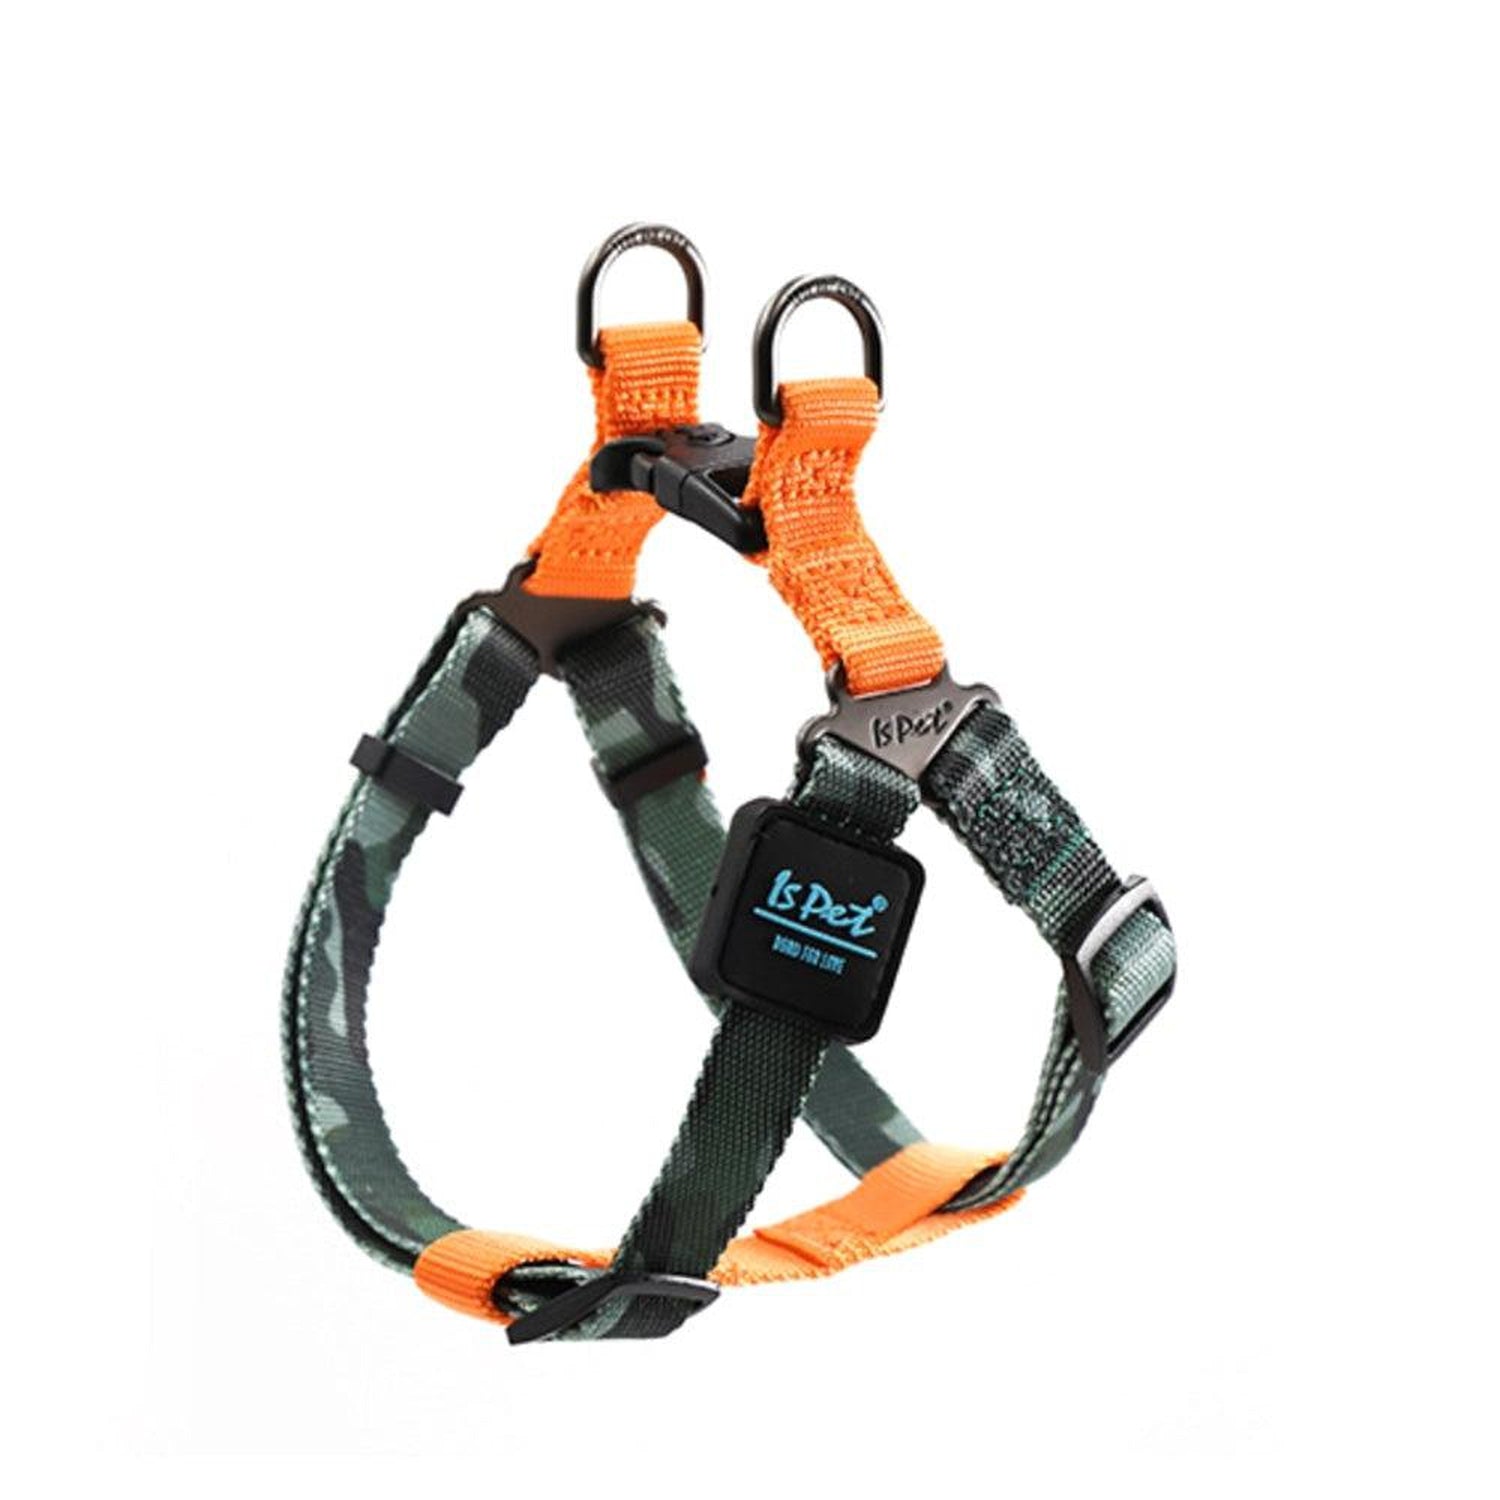 Bond For Love Dog Harness - Military